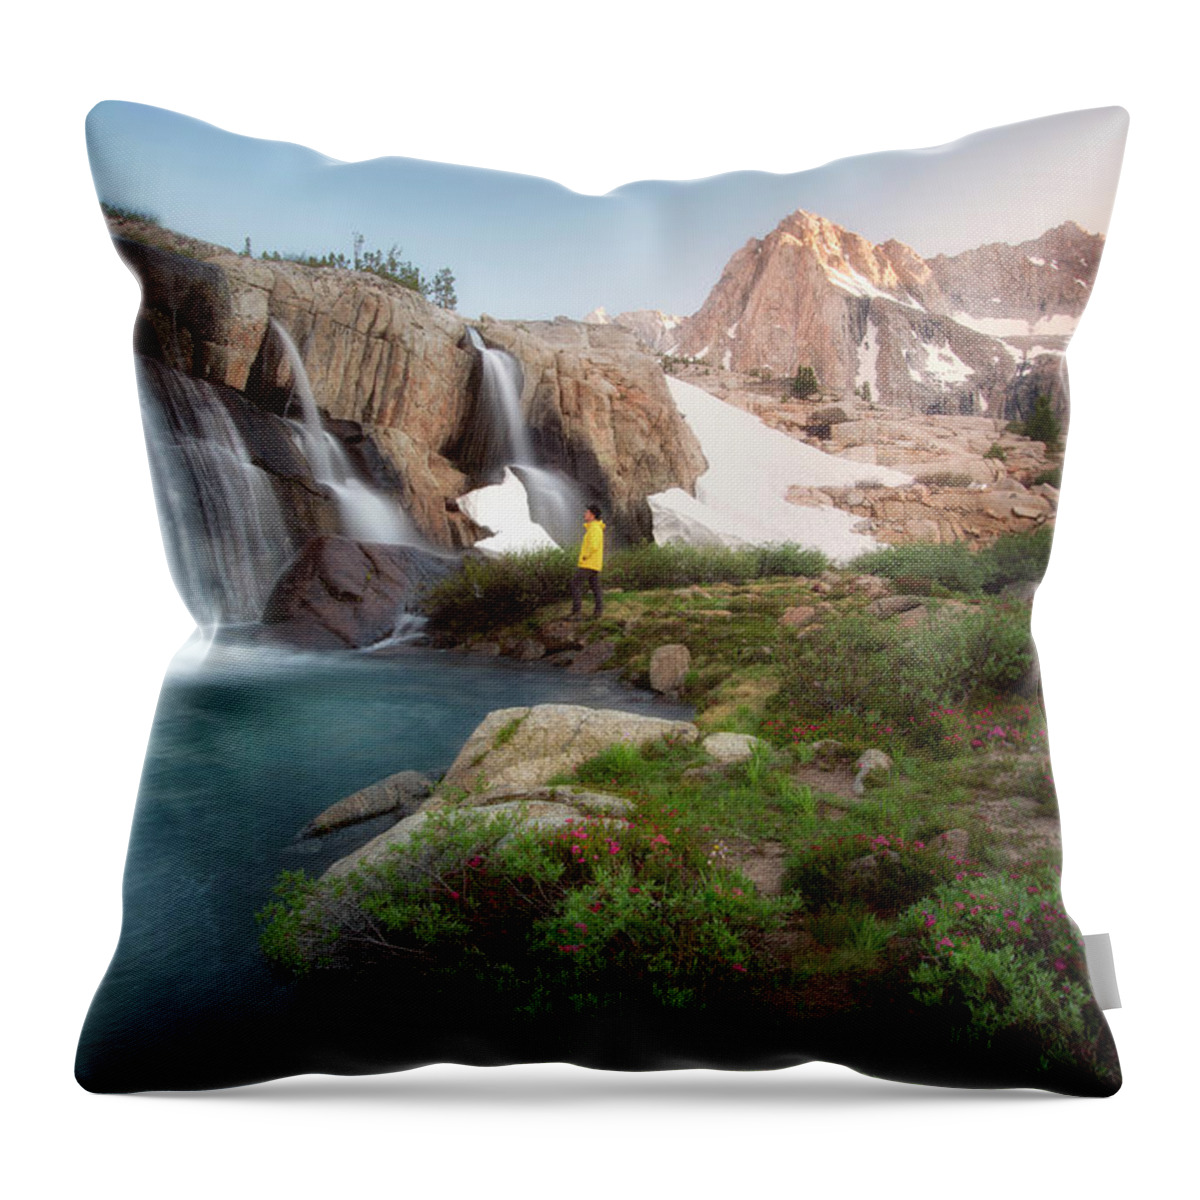 Backpack Throw Pillow featuring the photograph Backcountry Views by Nicki Frates